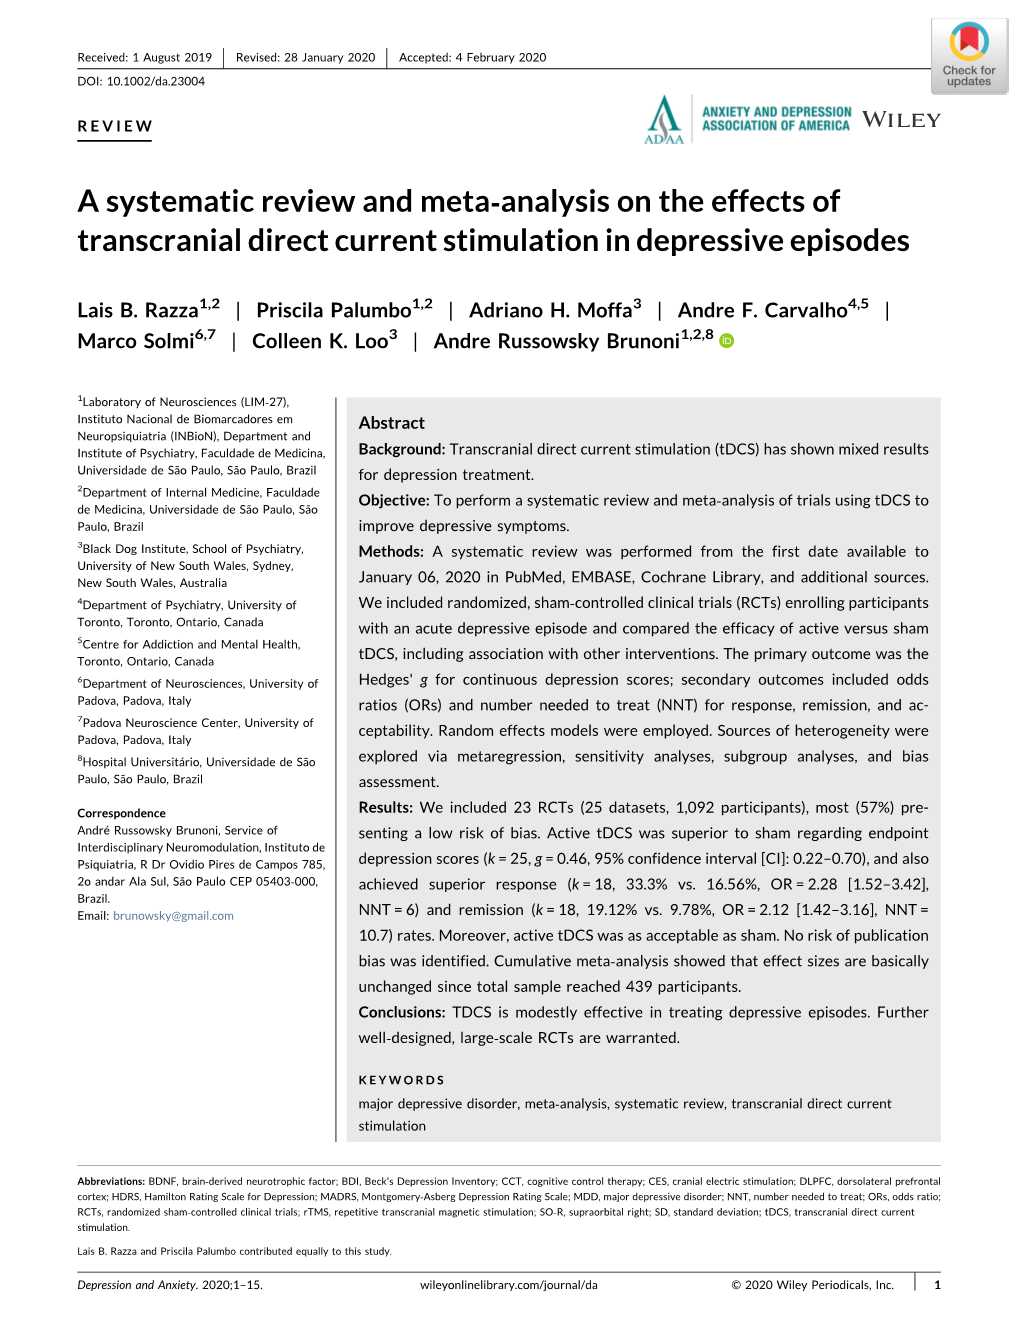 A Systematic Review and Meta‐Analysis on the Effects of Transcranial Direct Current Stimulation in Depressive Episodes